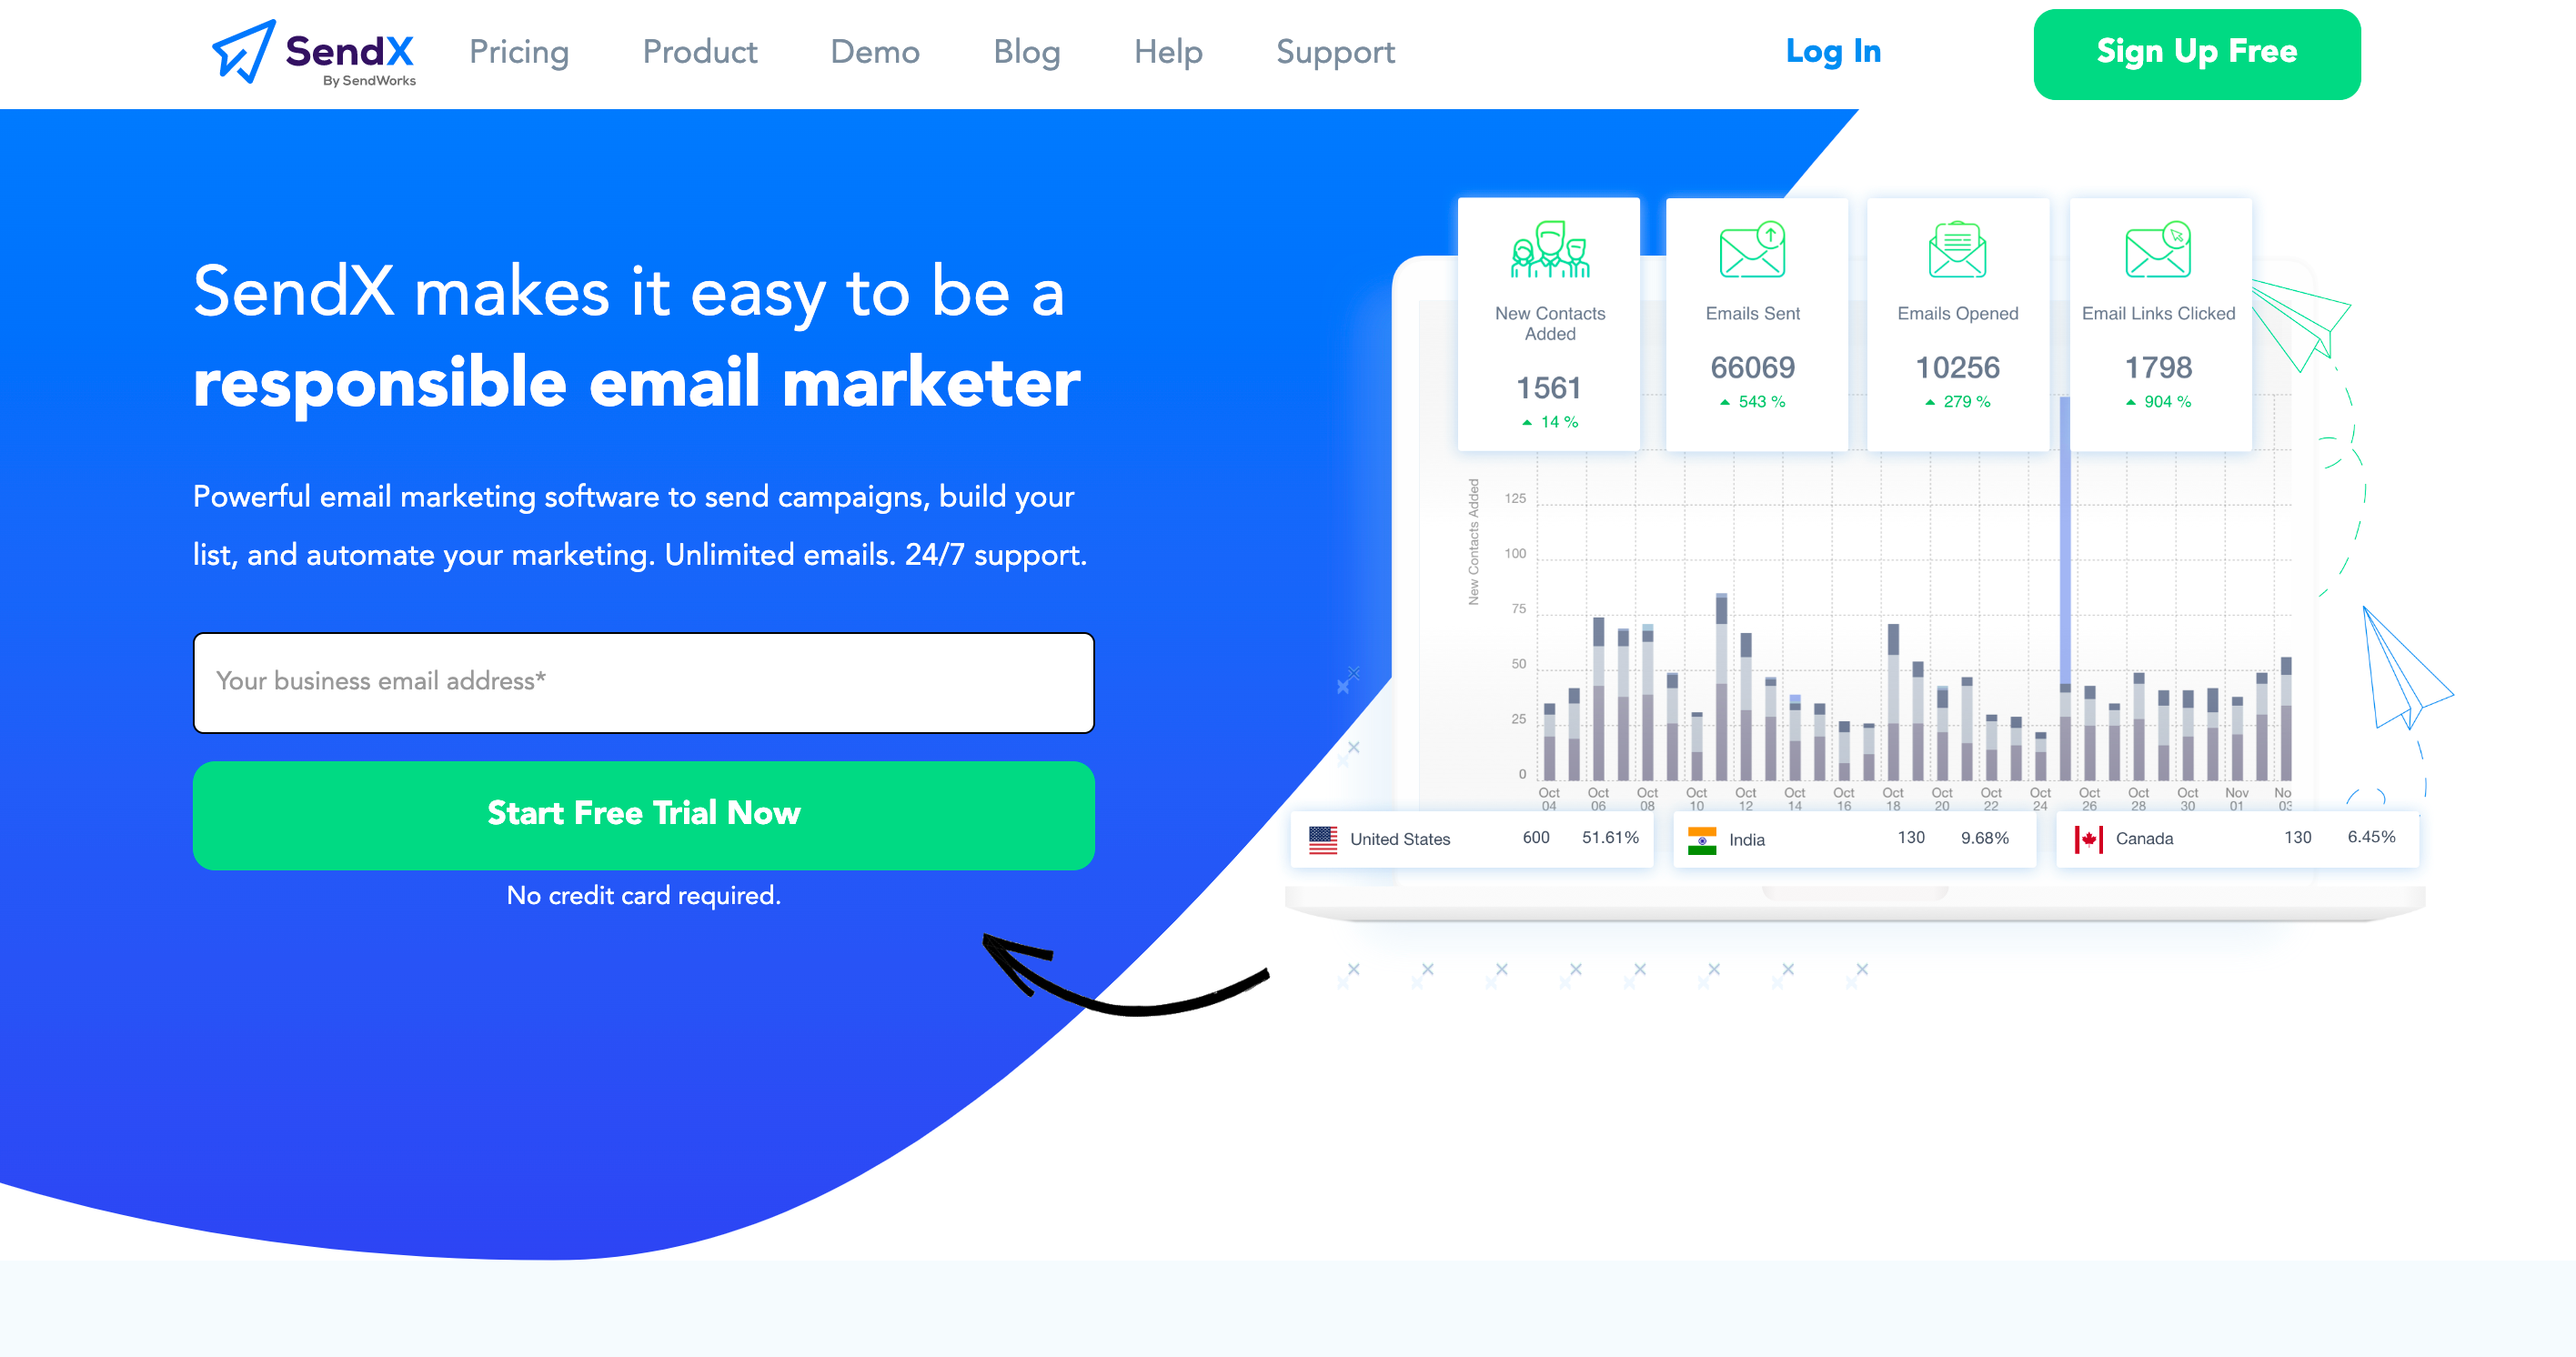 bulk email provider to send marketing emails, unlimited emails, and mass email